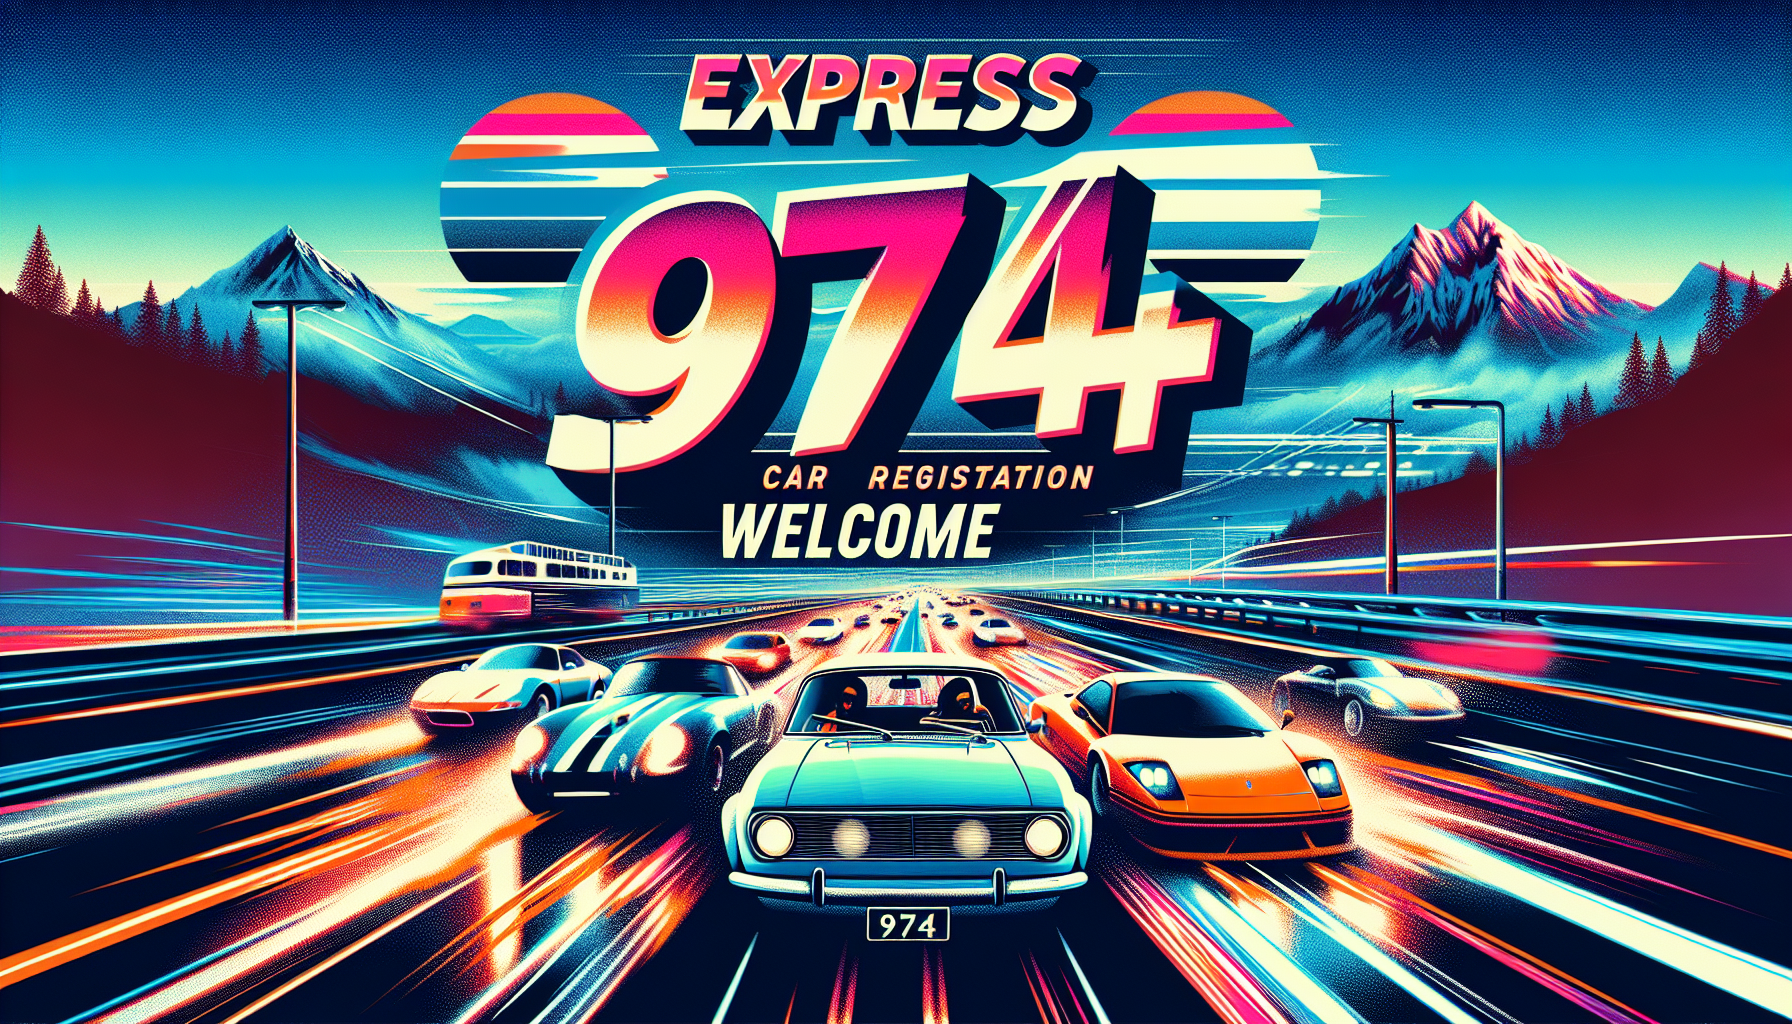 get your car registration done quickly with carte grise express 974. visit our website for a hassle-free experience.